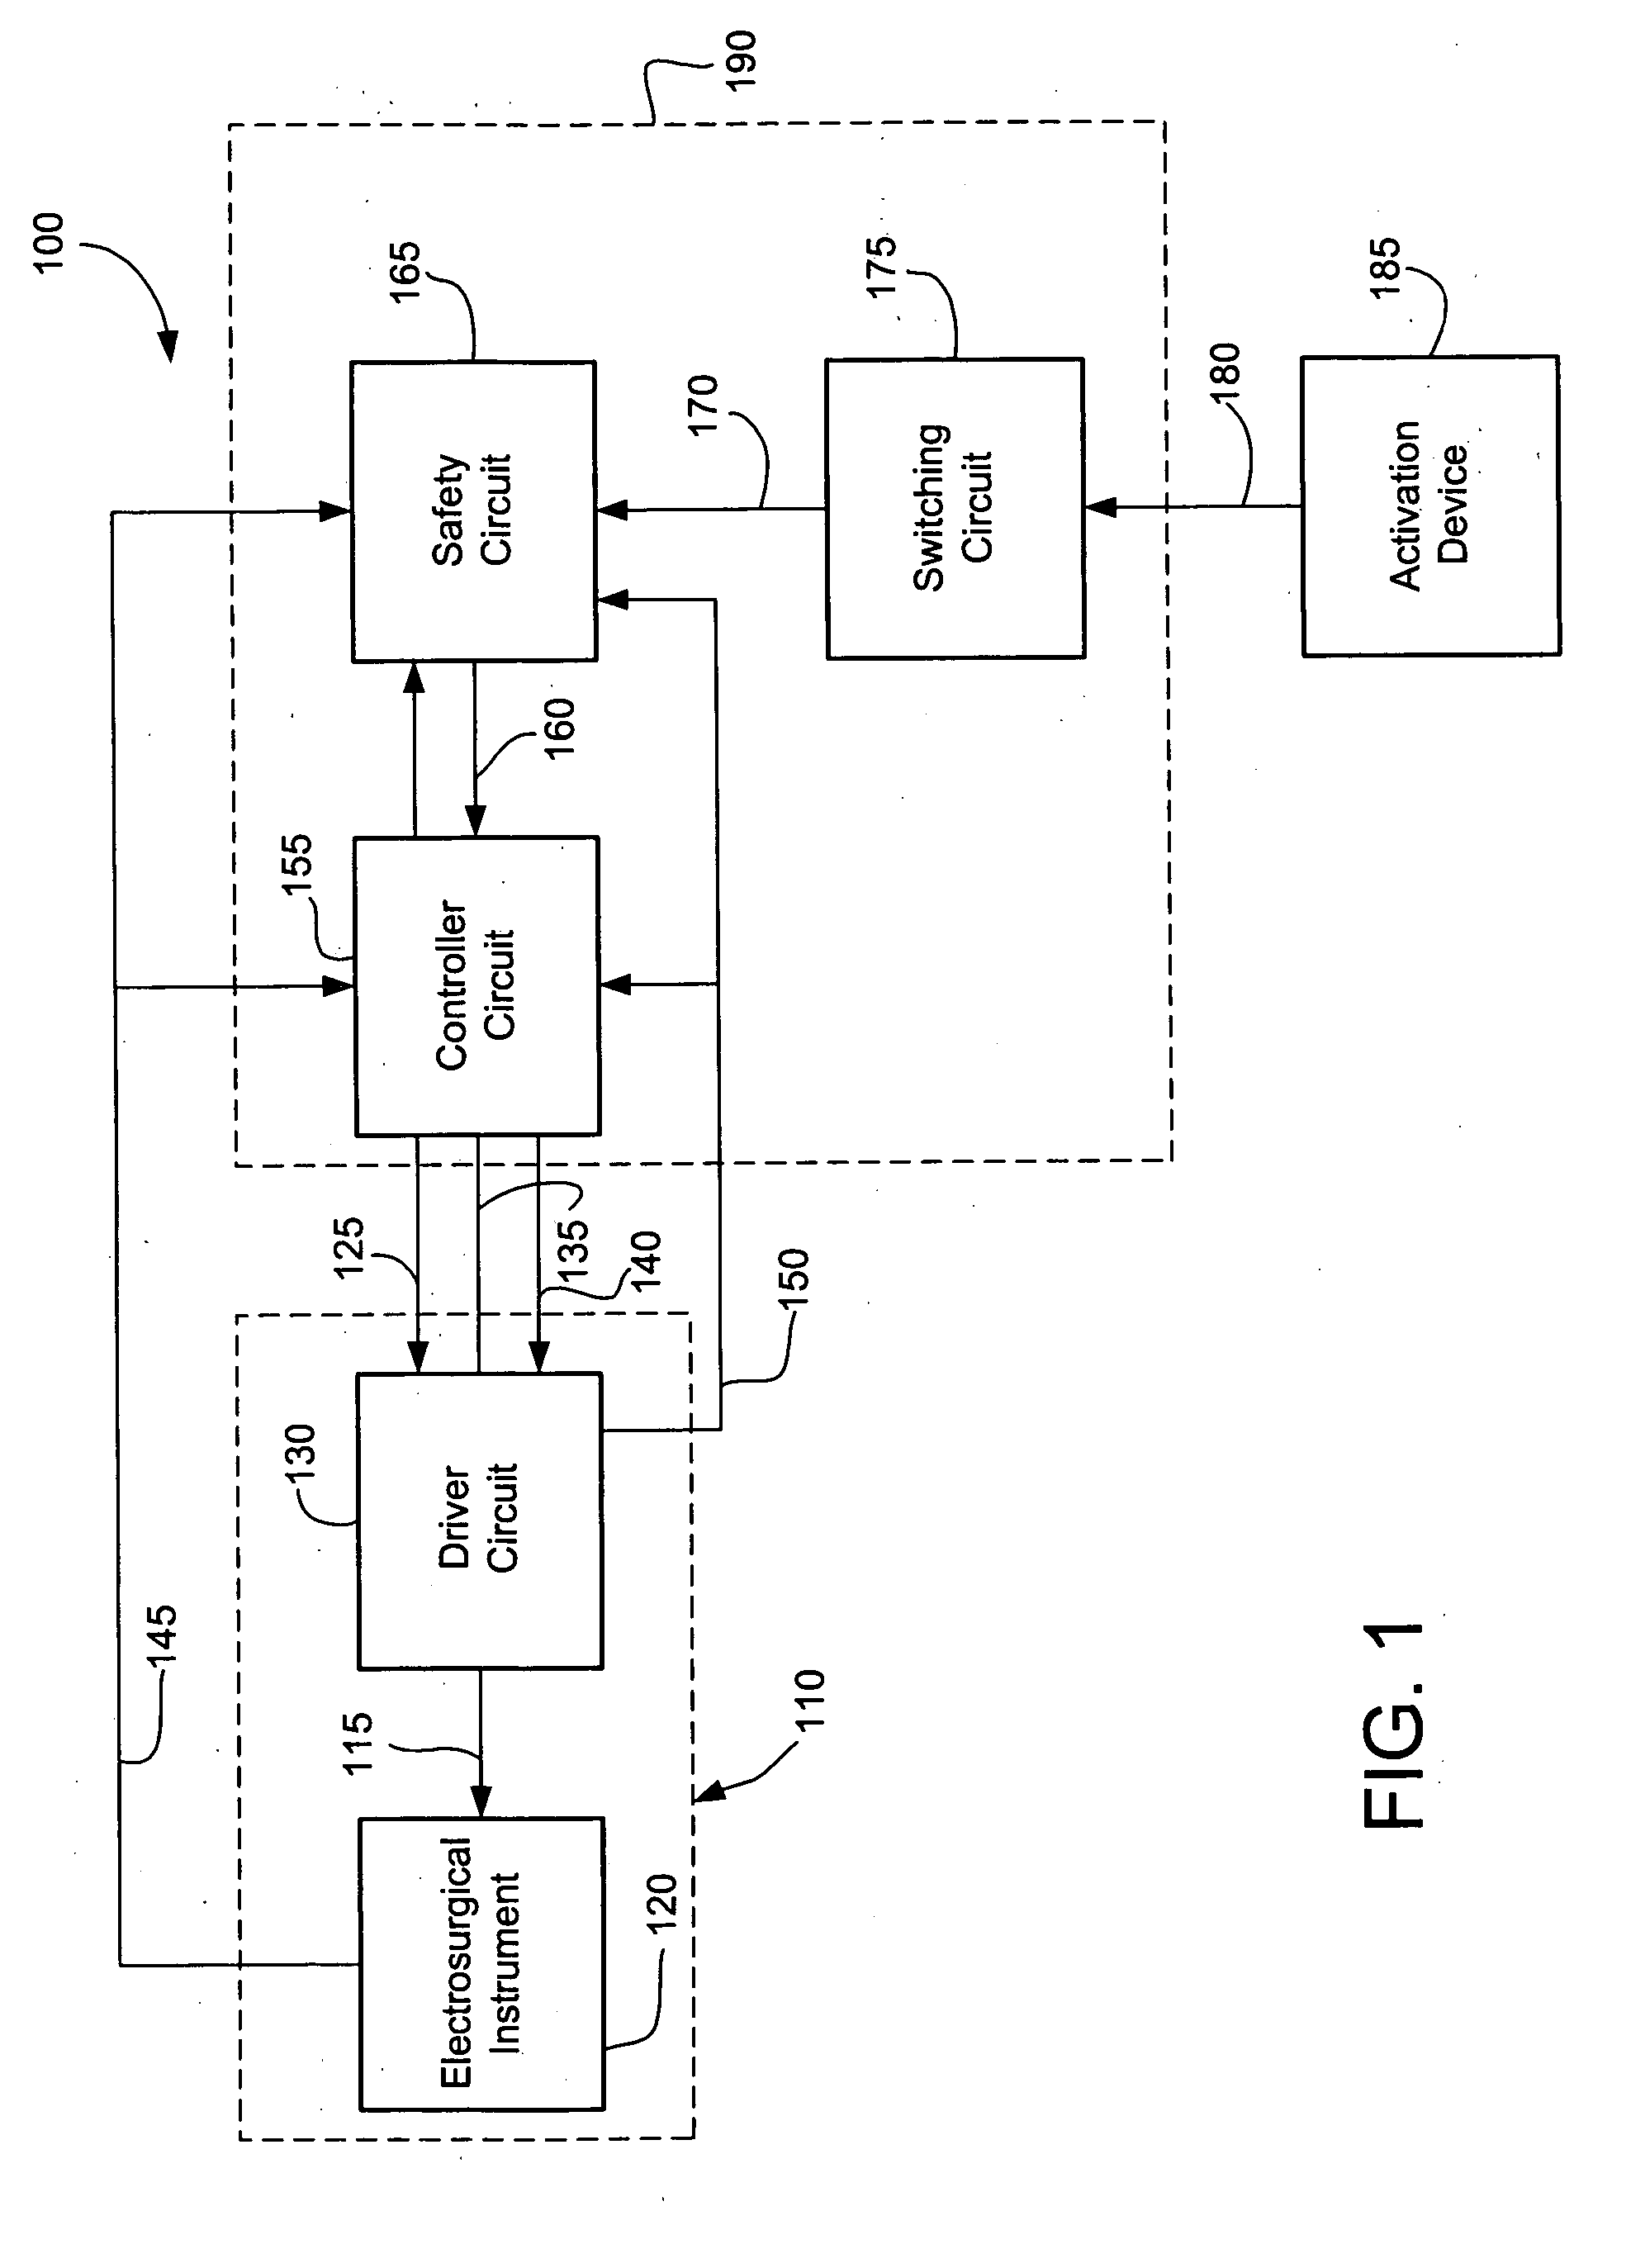 System for activating an electrosurgical instrument